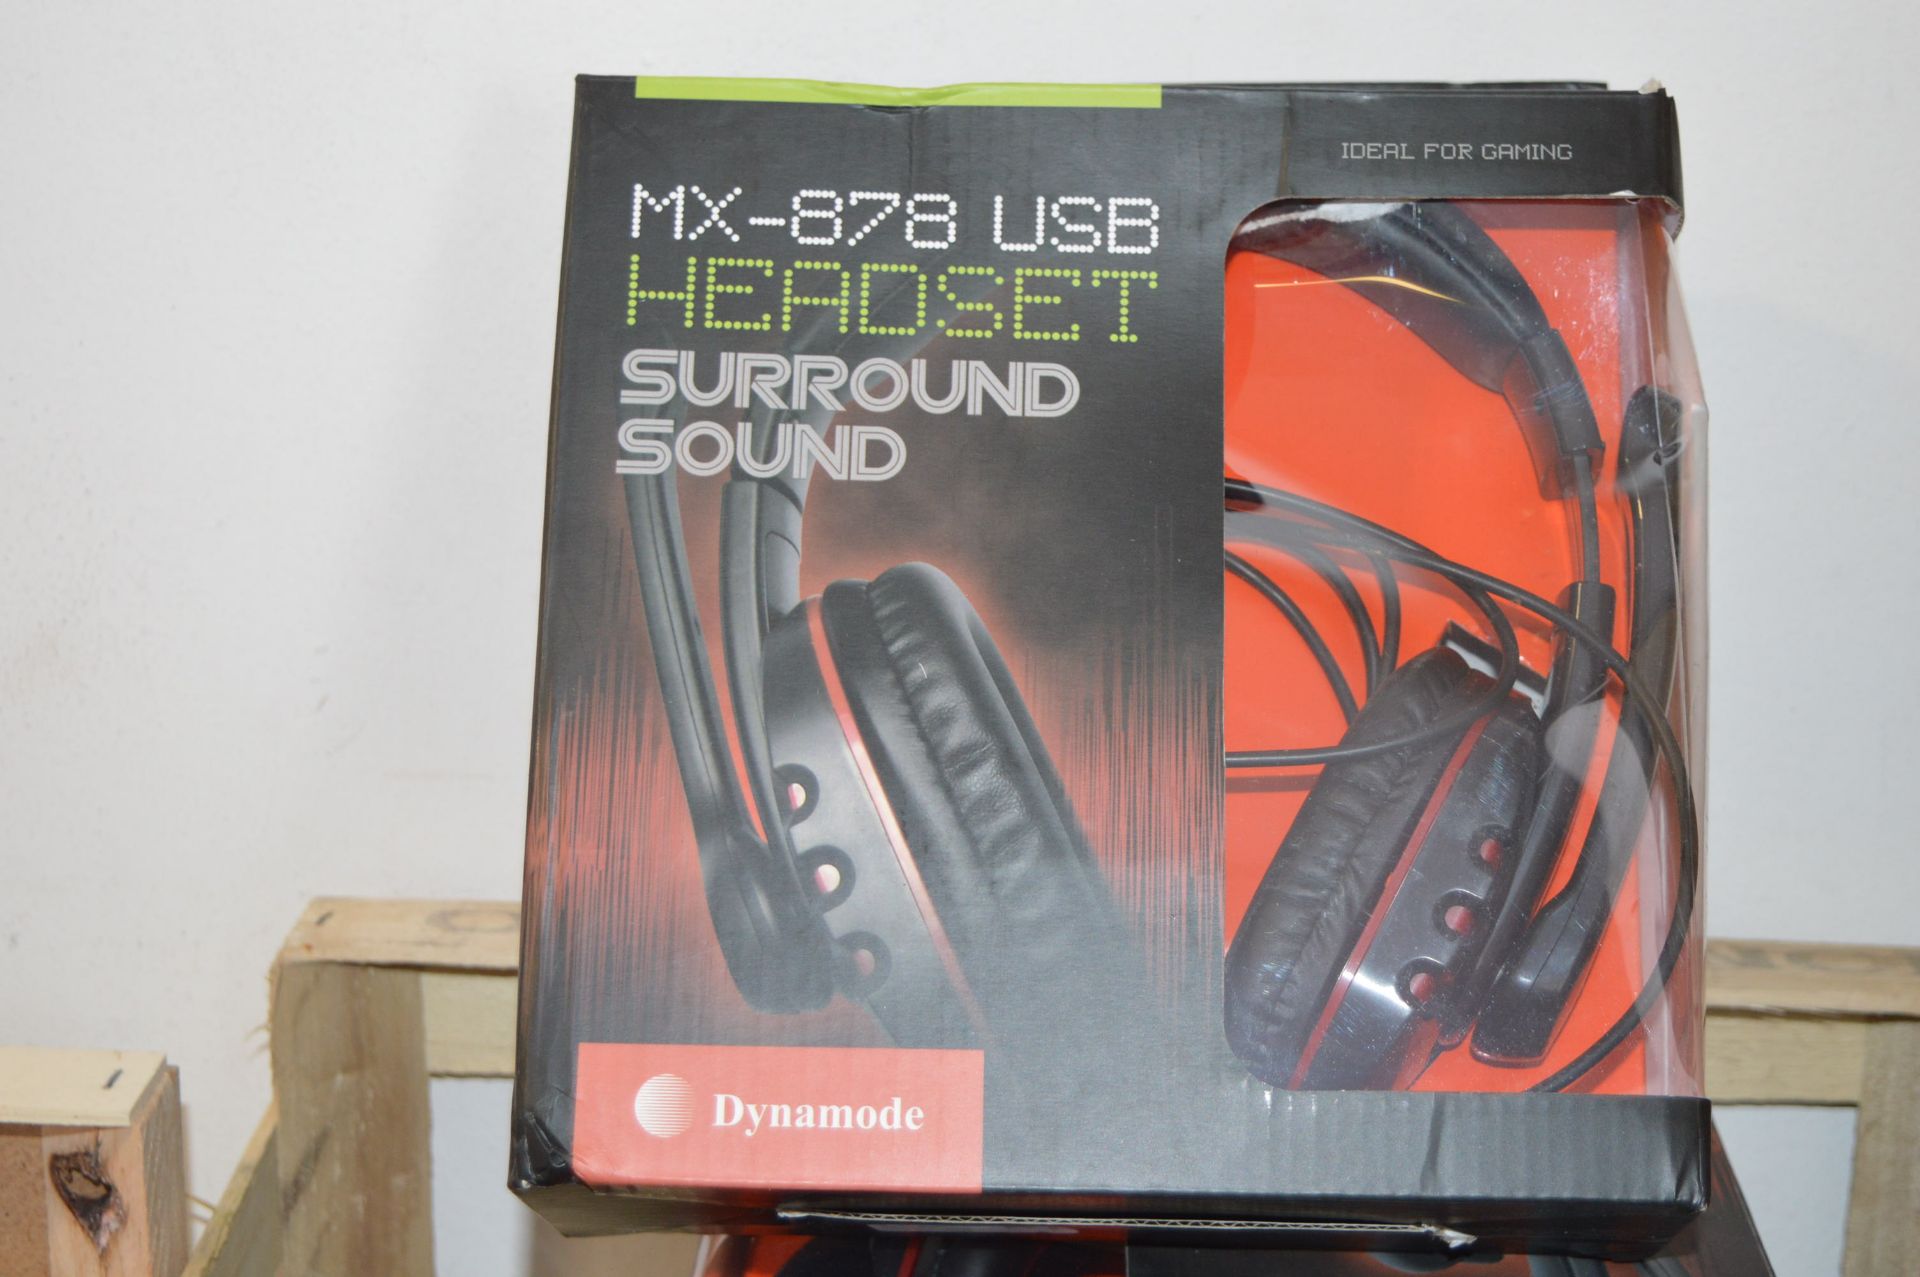 Eight Gaming Sound Surround Headsets - Image 2 of 2